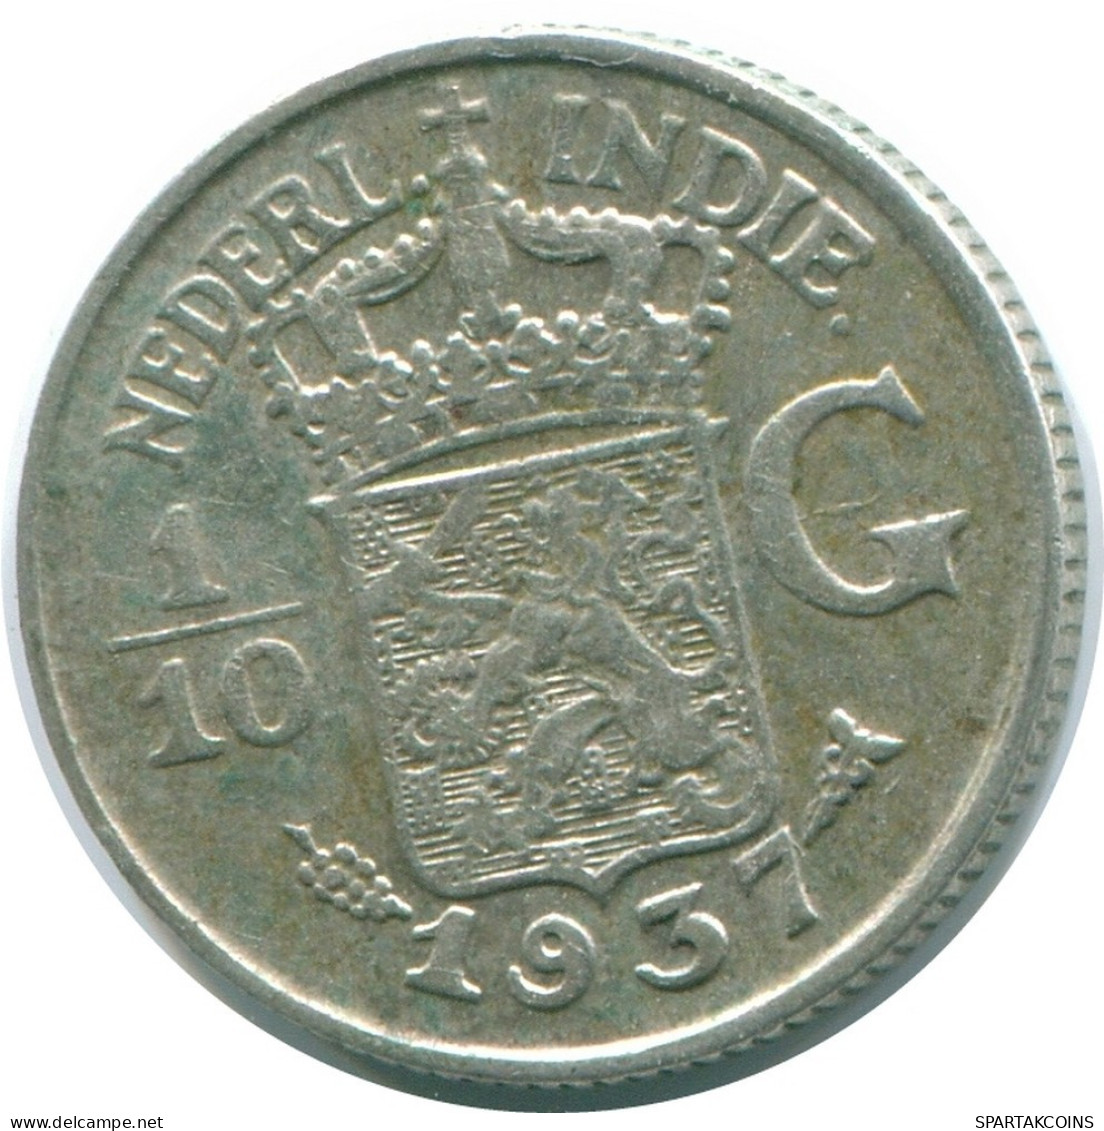 1/10 GULDEN 1937 NETHERLANDS EAST INDIES SILVER Colonial Coin #NL13473.3.U.A - Dutch East Indies